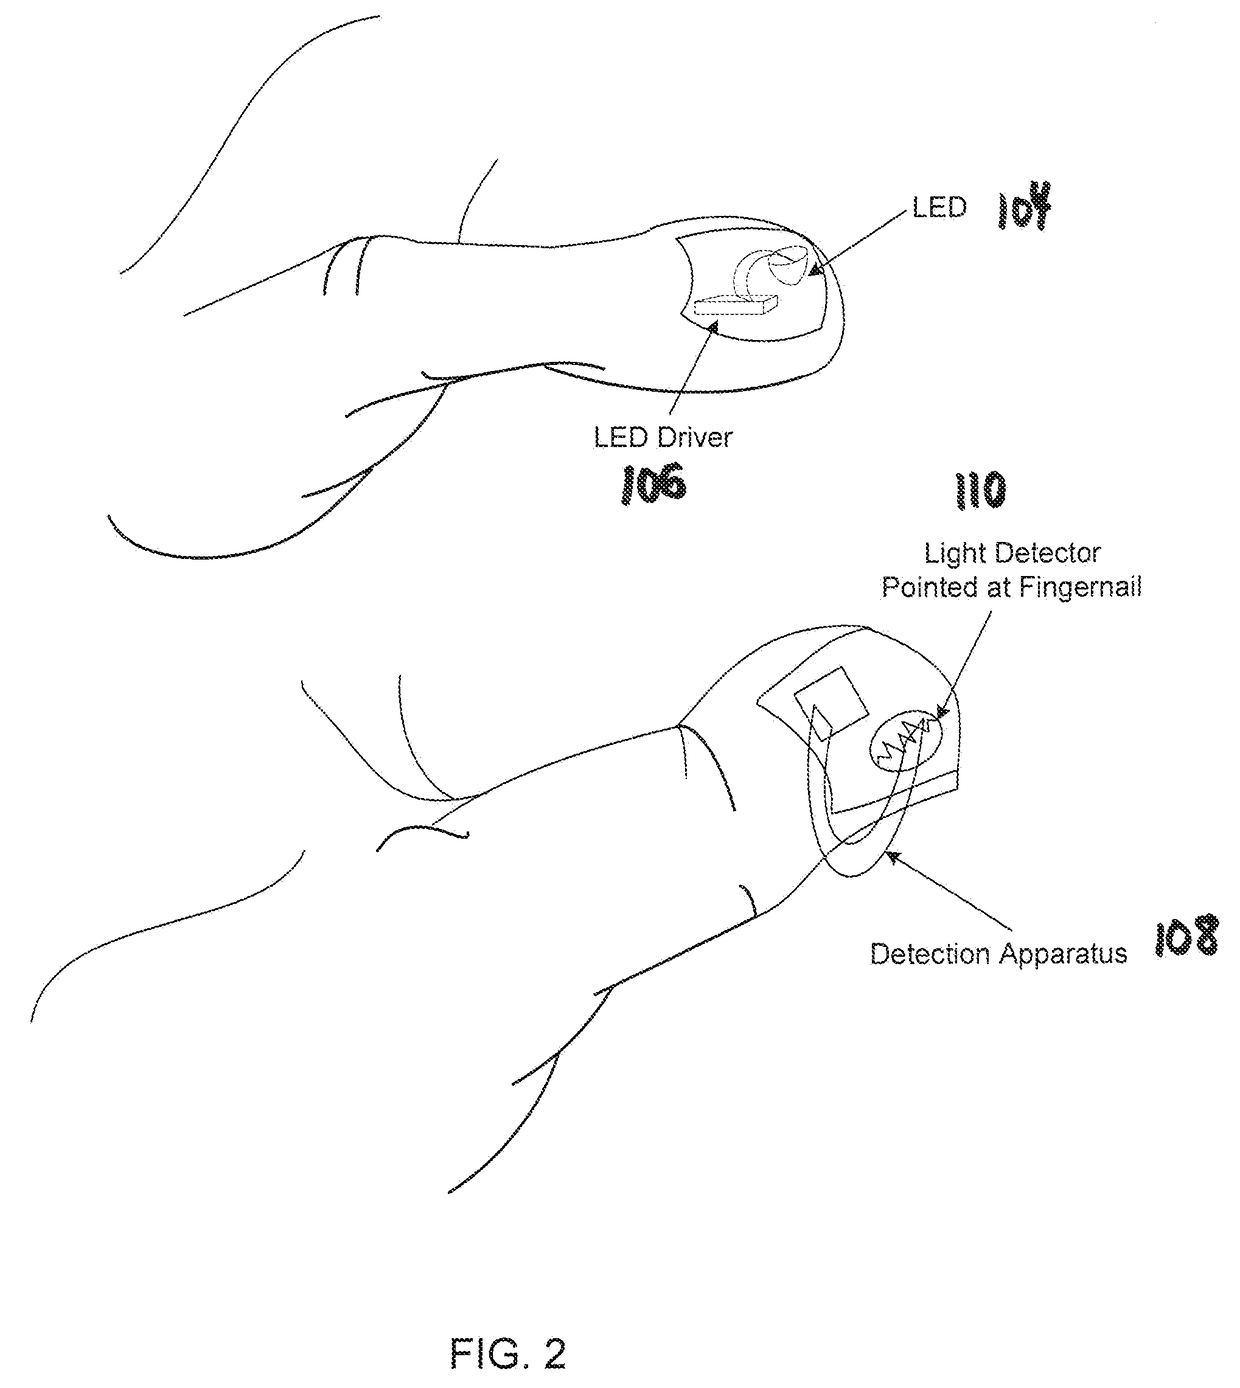 Systems, apparatuses and methods for controlling prosthetic devices by gestures and other modalities